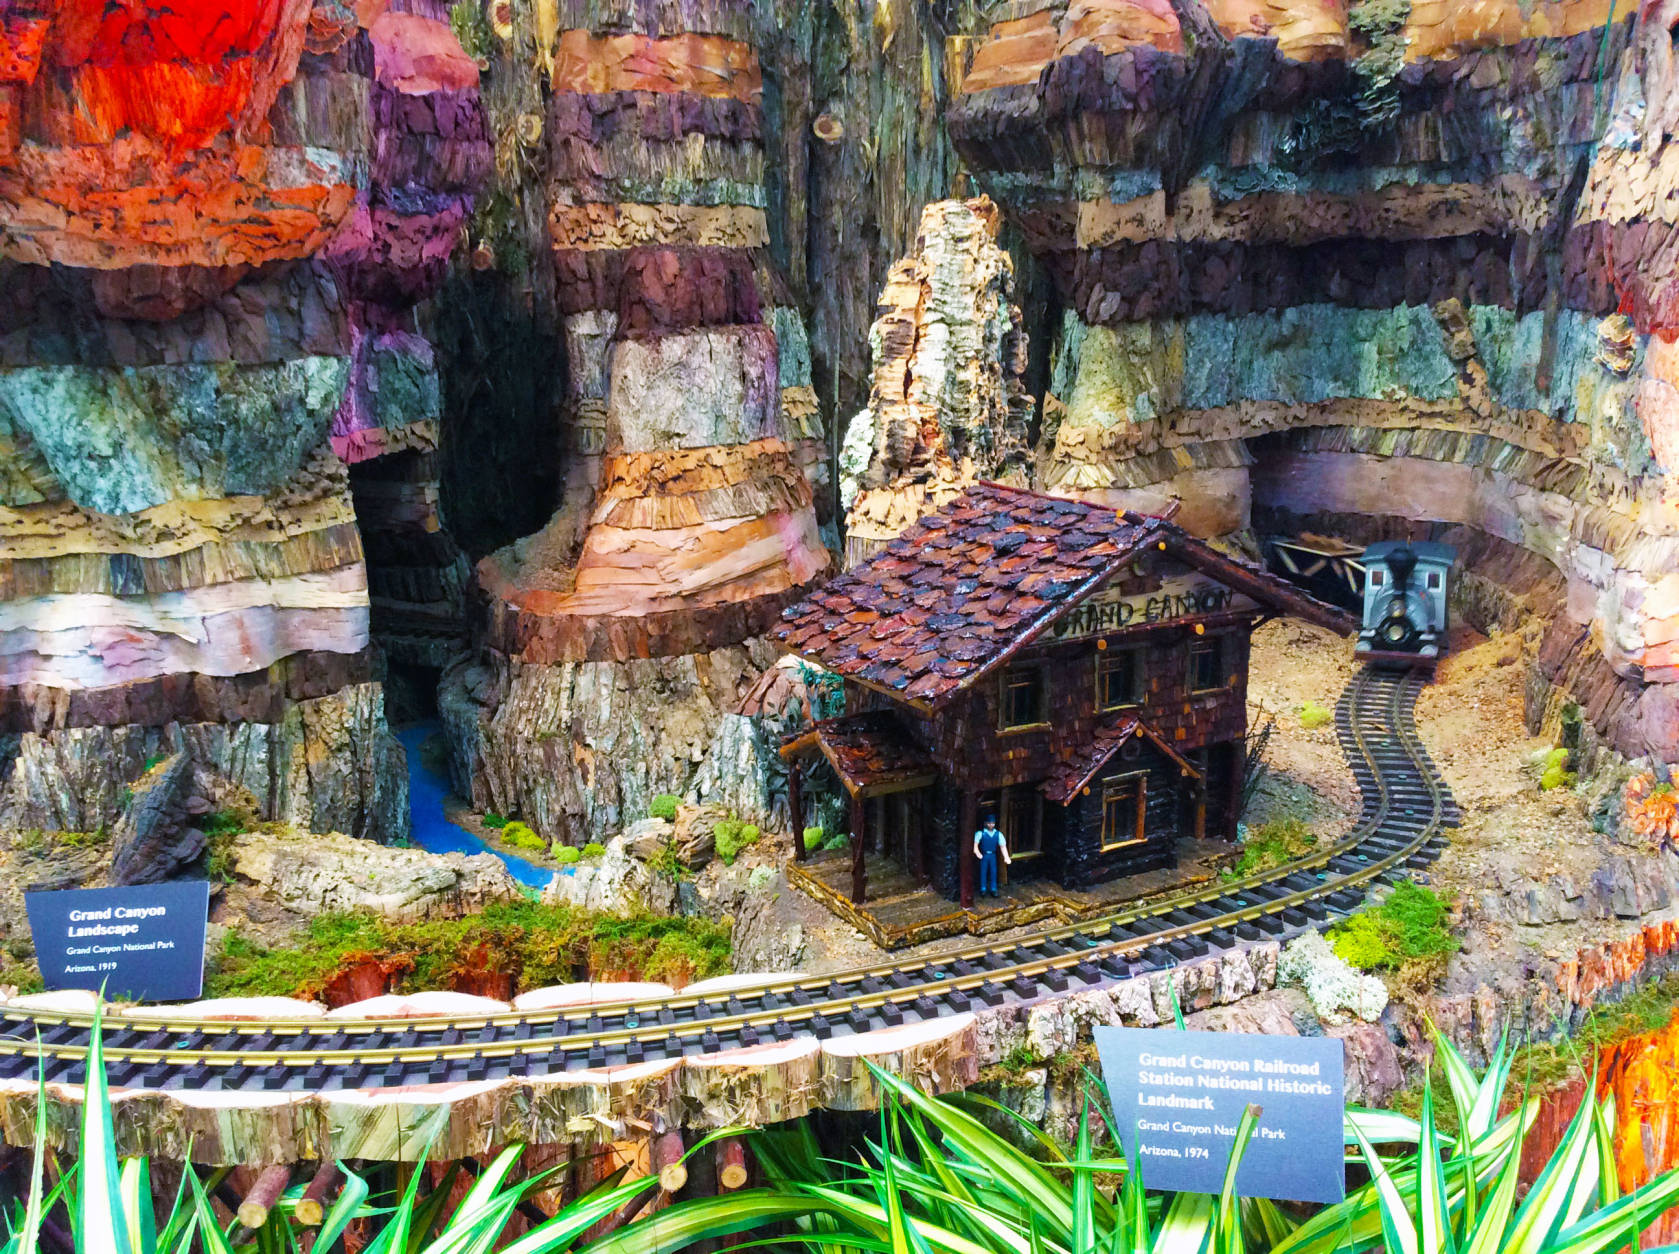 The model trains chug around more than 50 different national parks and sites, all made from plants and other natural materials. (WTOP/Hanna Choi)